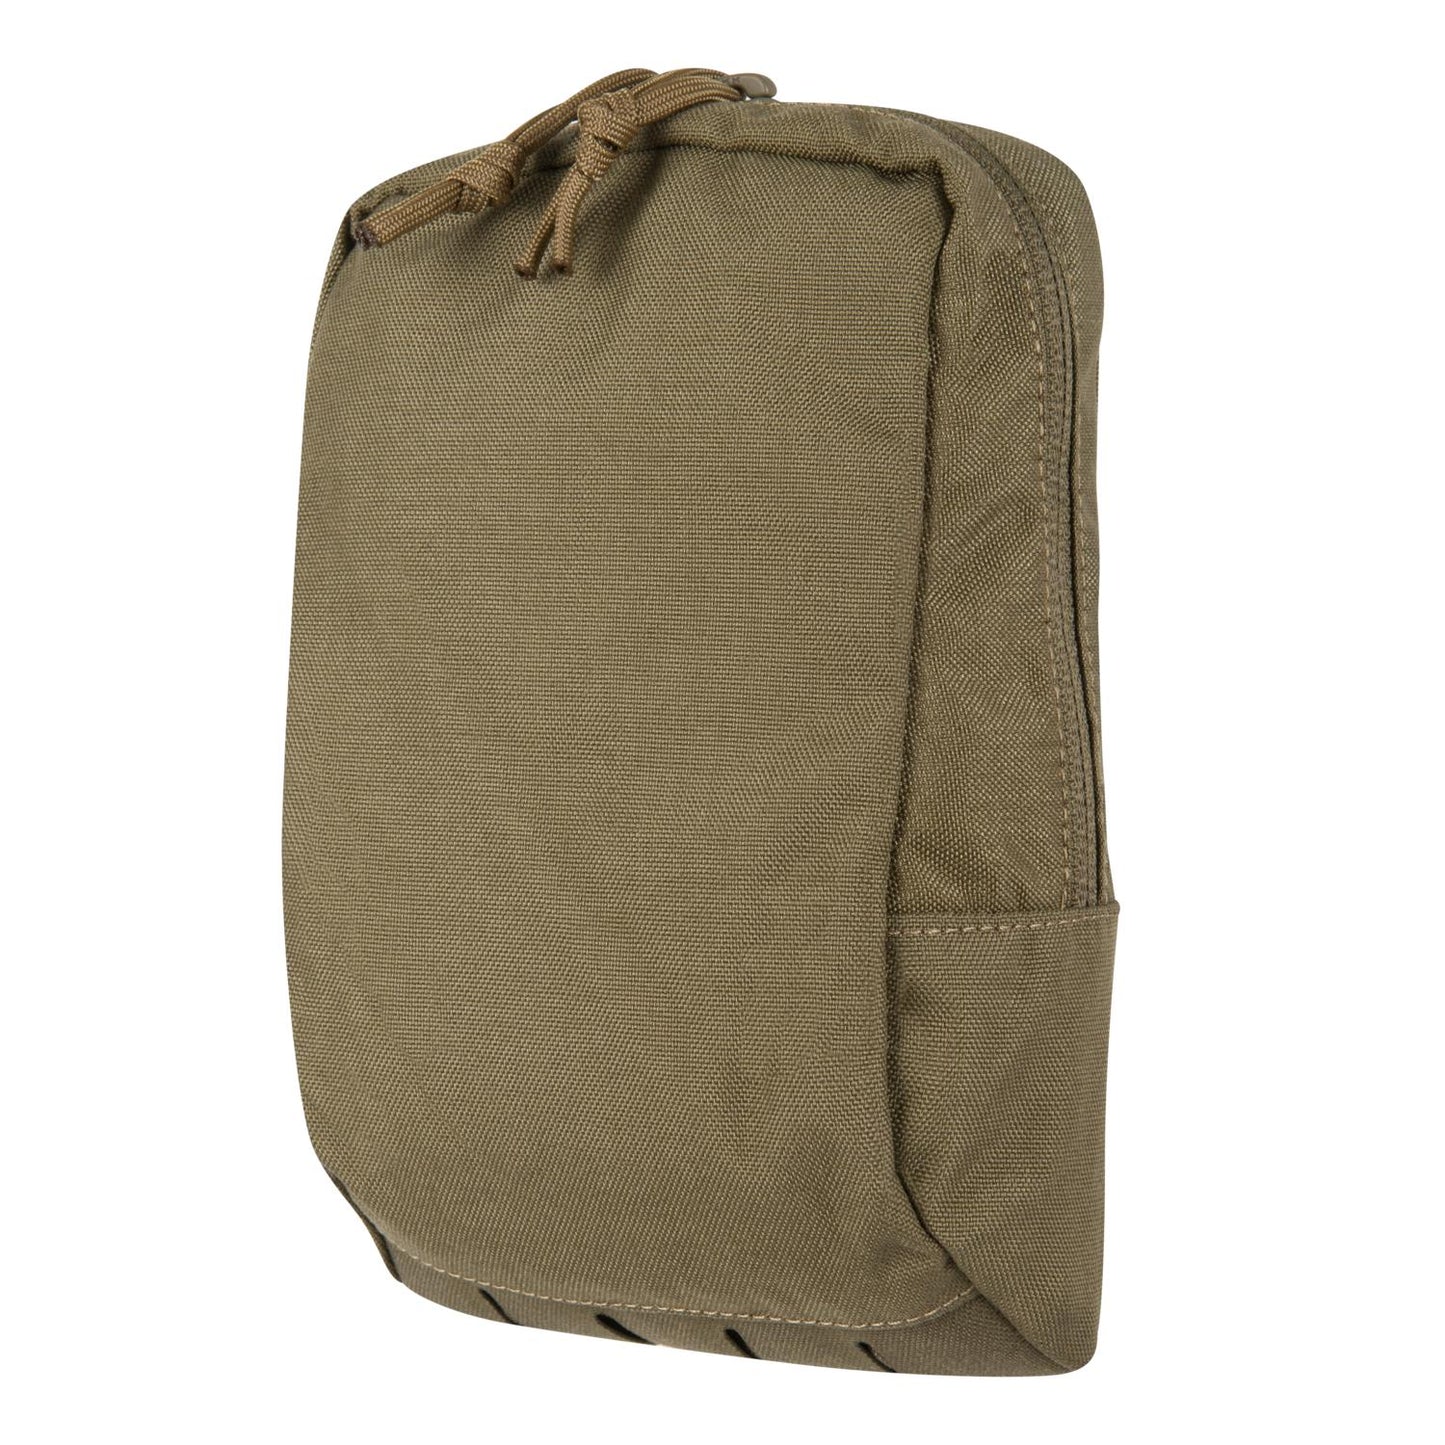 DIRECT ACTION UTILITY POUCH MEDIUM